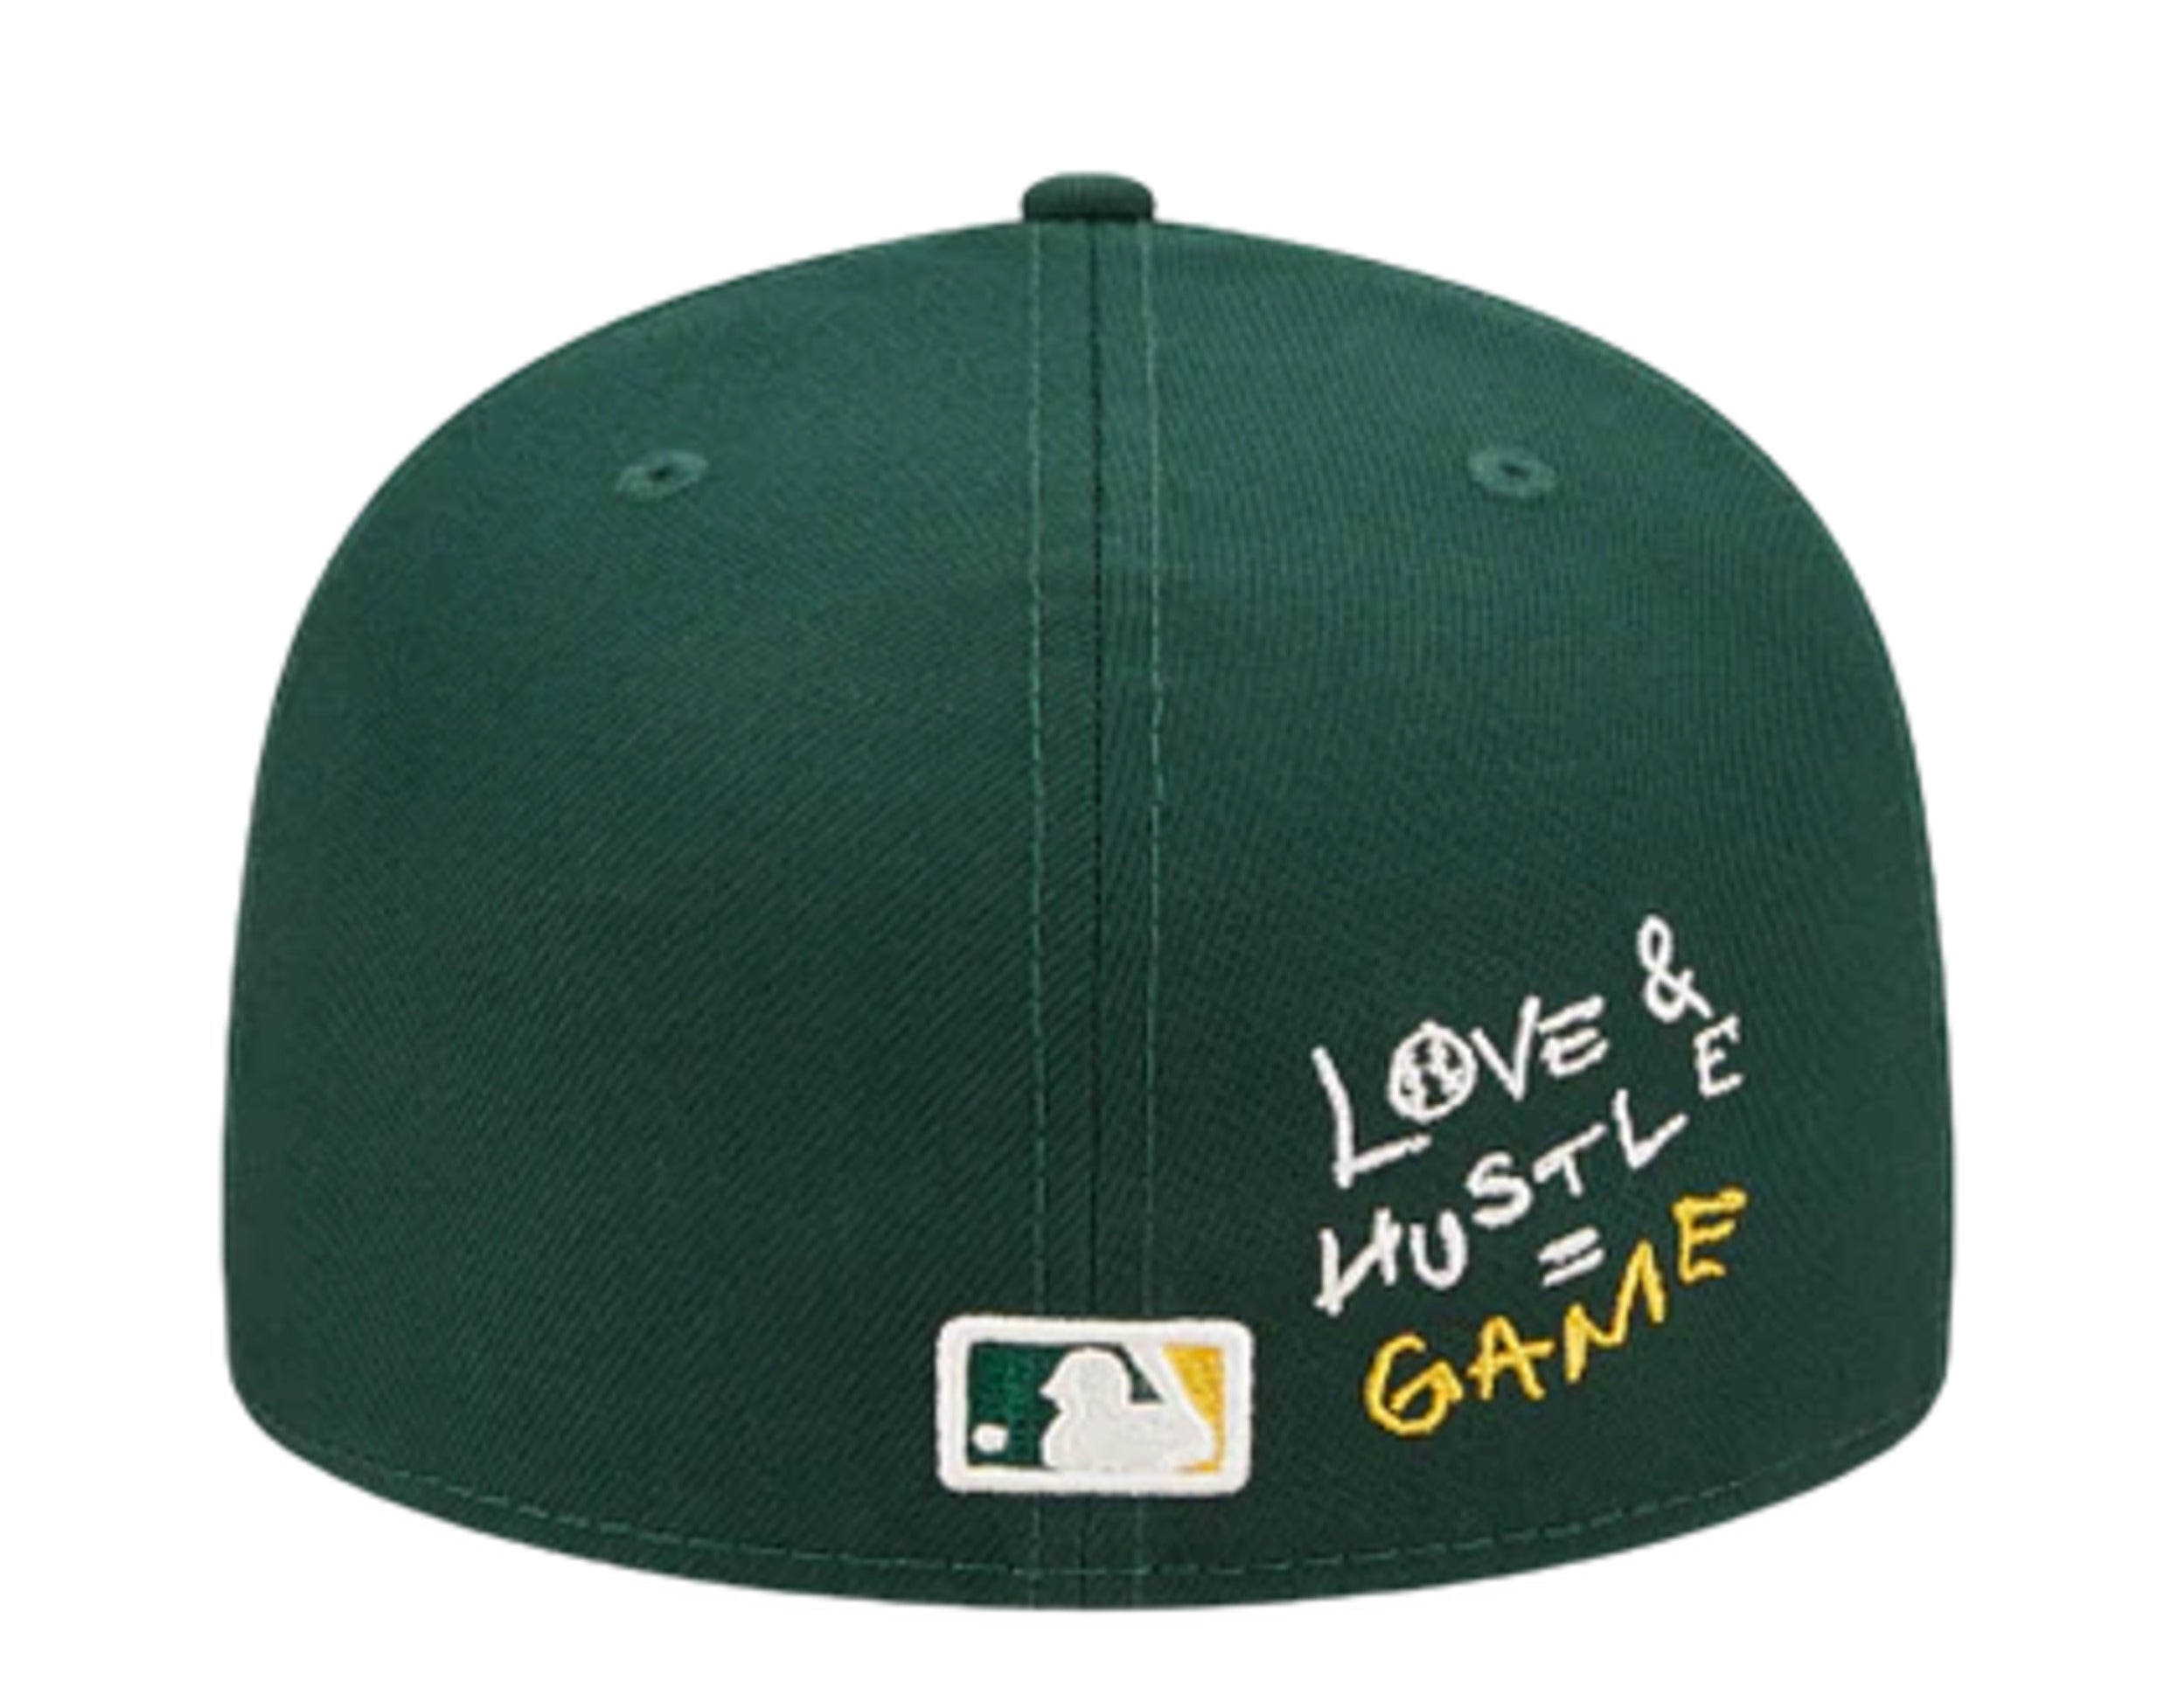 New Era Caps Oakland Athletics 59FIFTY Fitted Hat